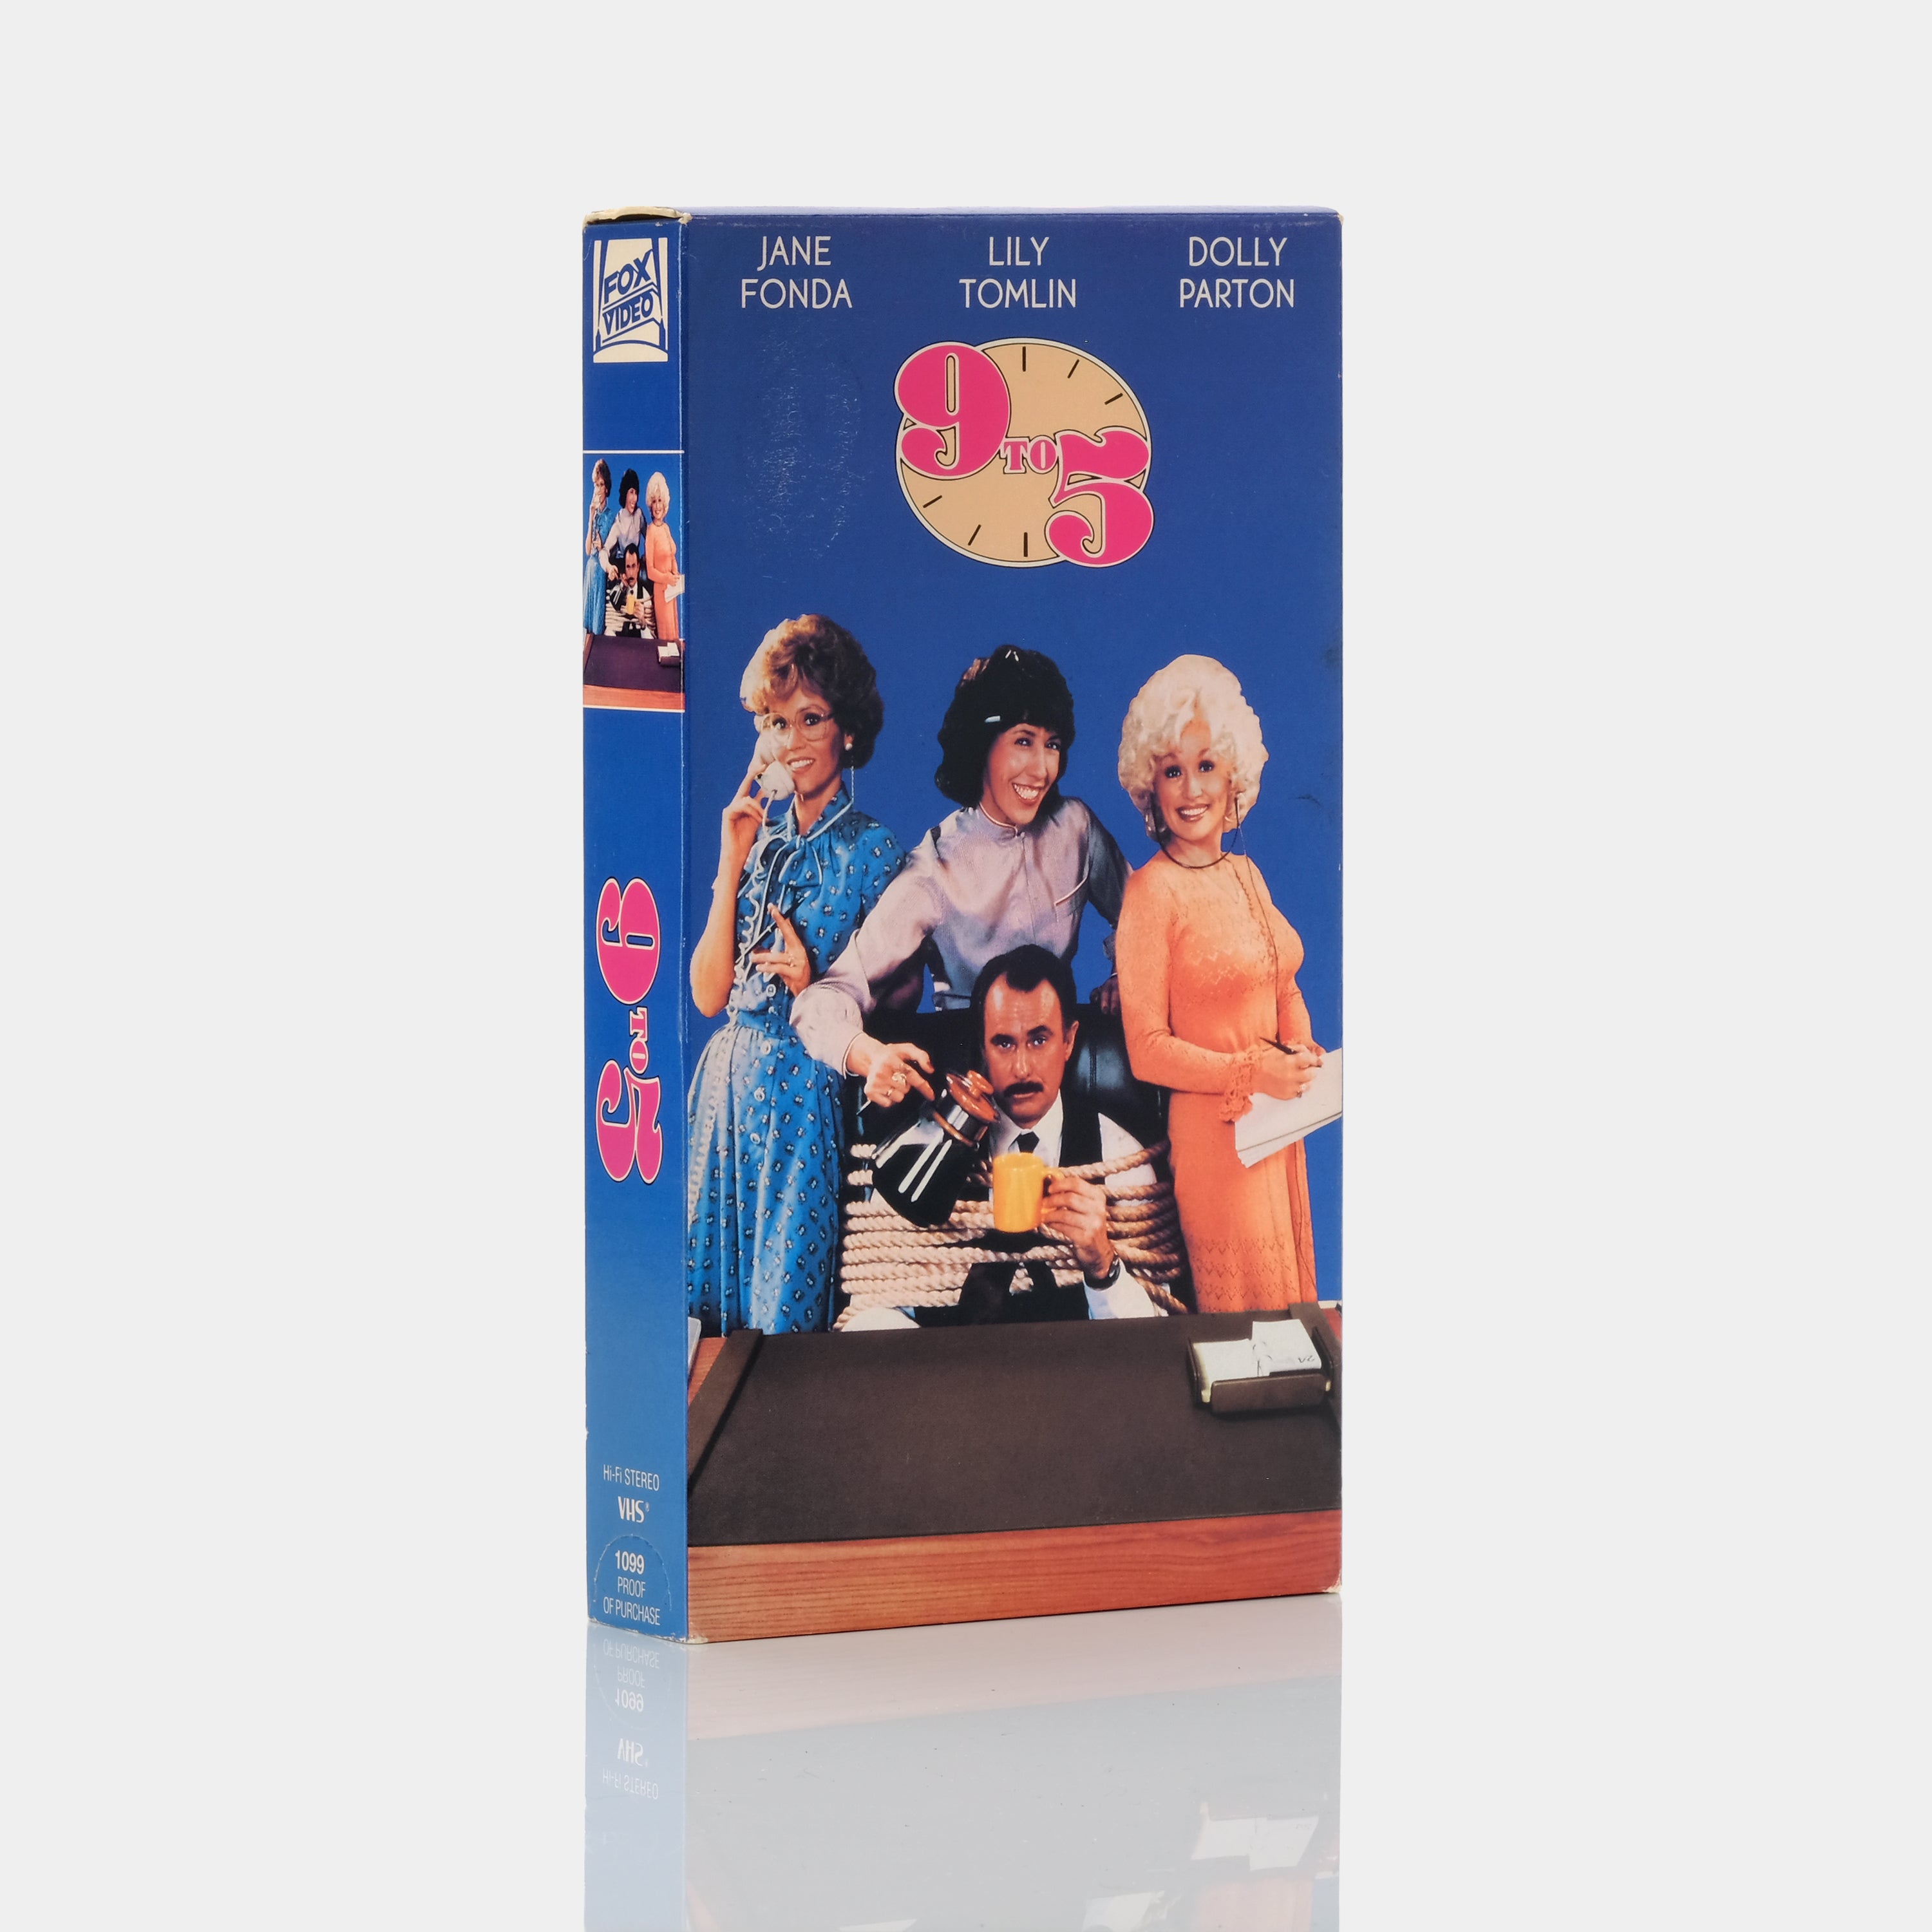 9 to 5 VHS Tape